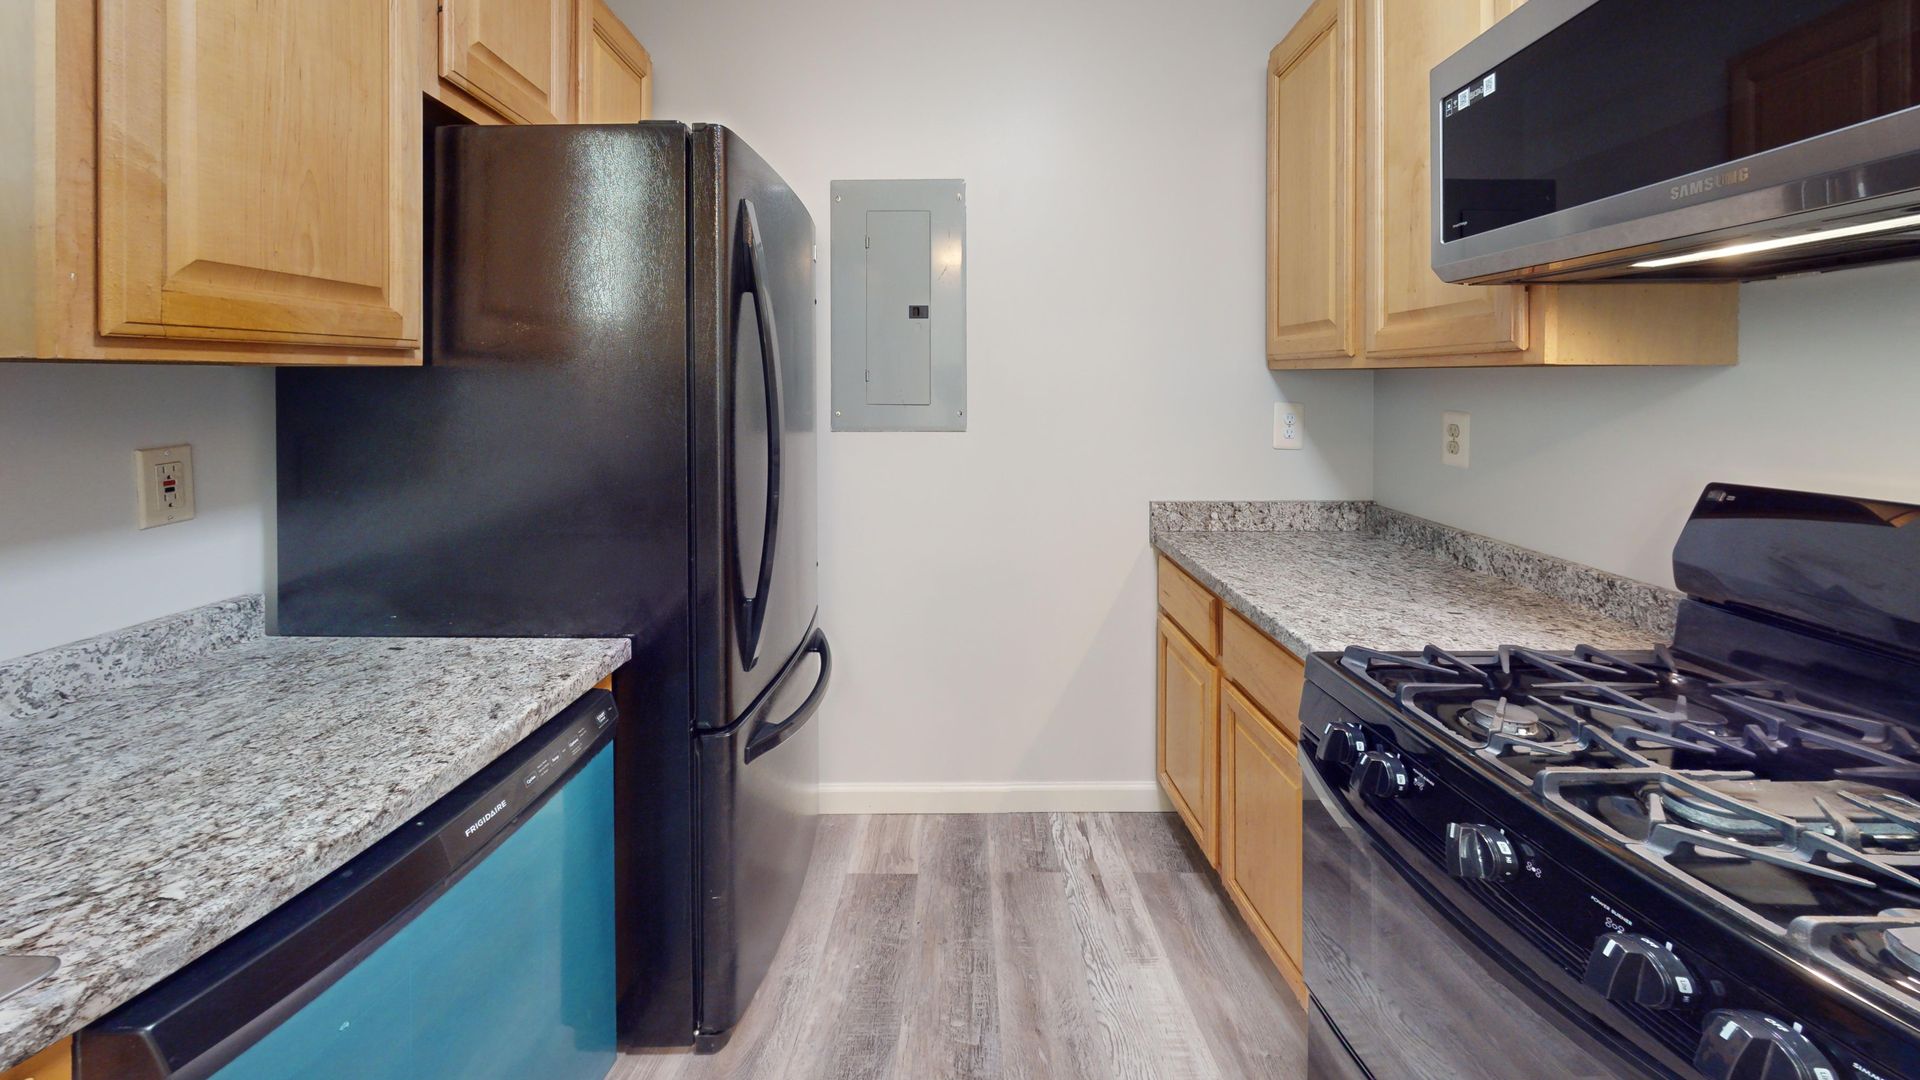 Logan Circle 1,000+ 1 Plus Den Apartment W/Private Patio Private Parking Available In Amazing Location!